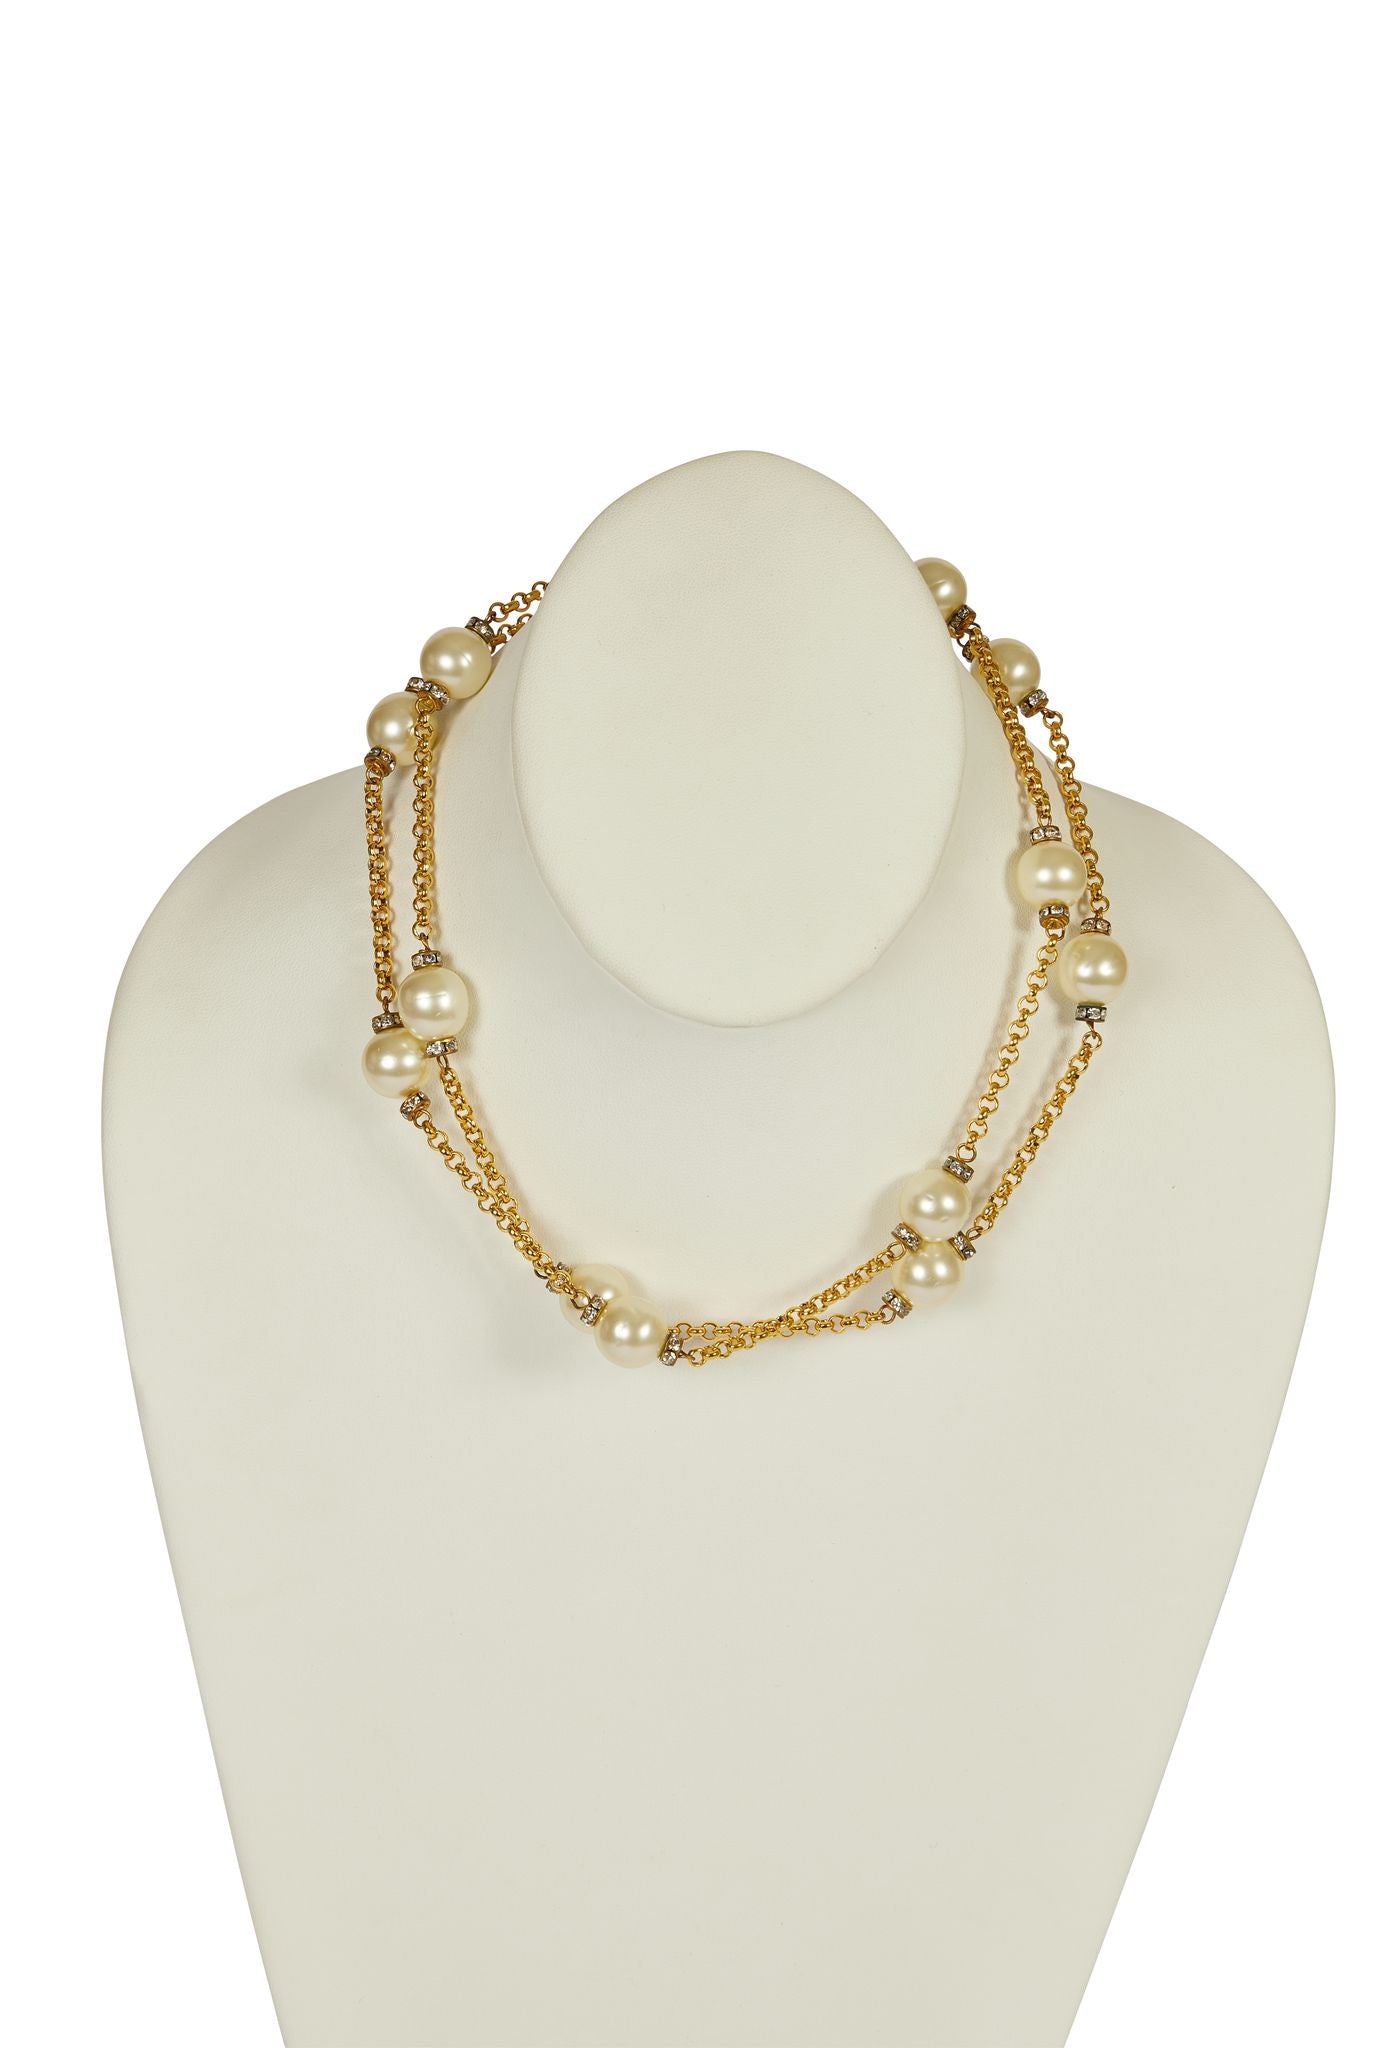 CHANEL - Vintage 80s Pearl Strass Crystal Accent - Pearl / Gold Necklace, CHANEL